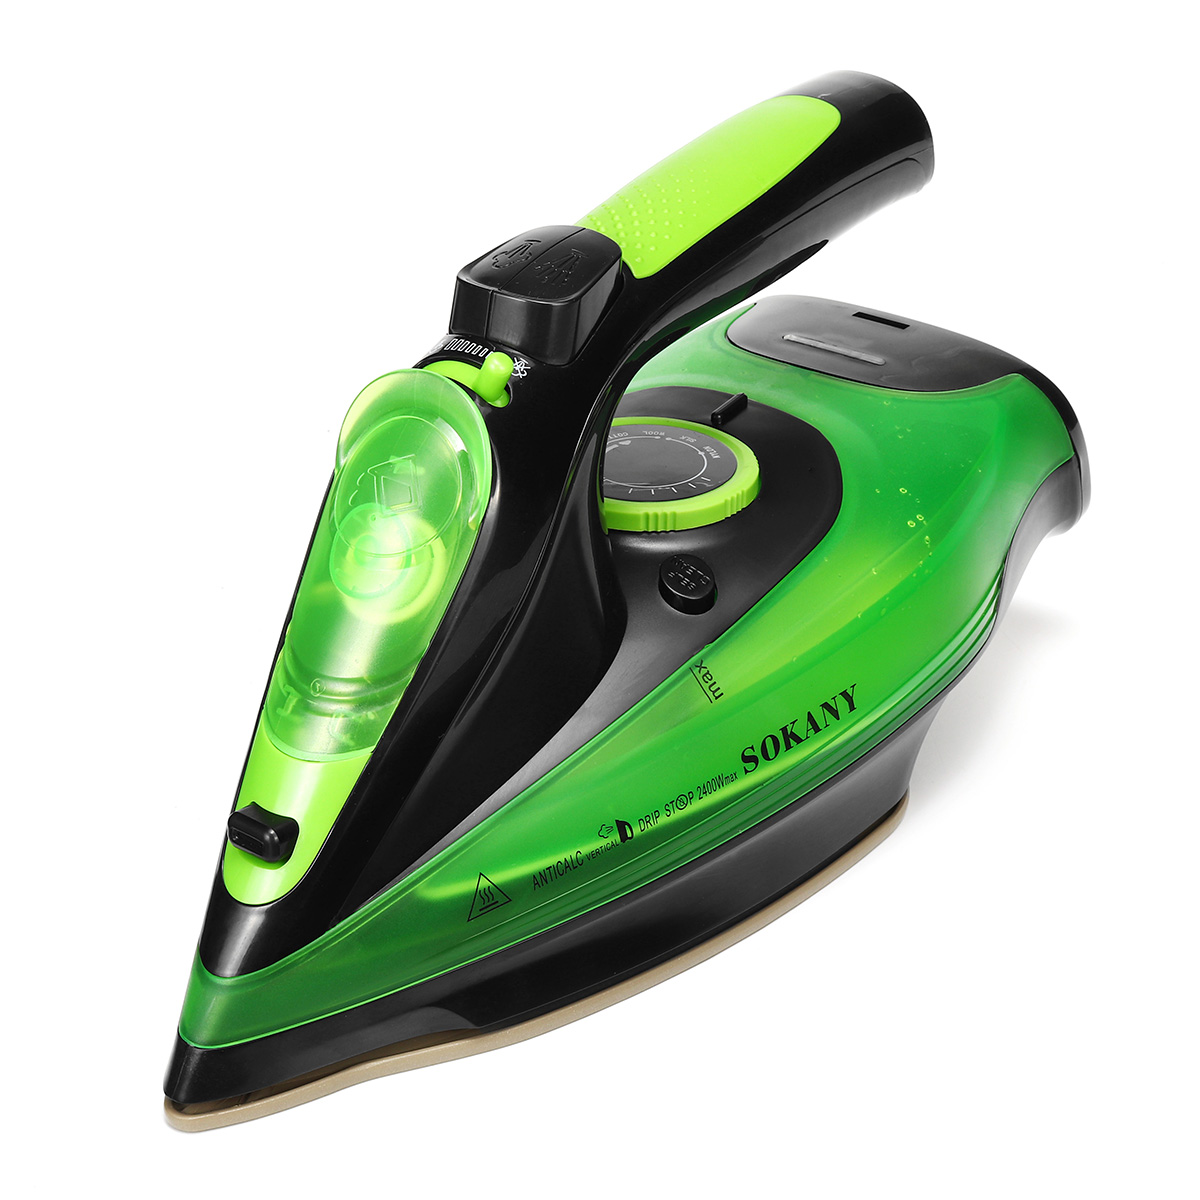 2400W-220V-Cordless-Steam-Iron-Multifunction-Clothes-Docking-Station-Dry-Ironing-Industry-1346803-7